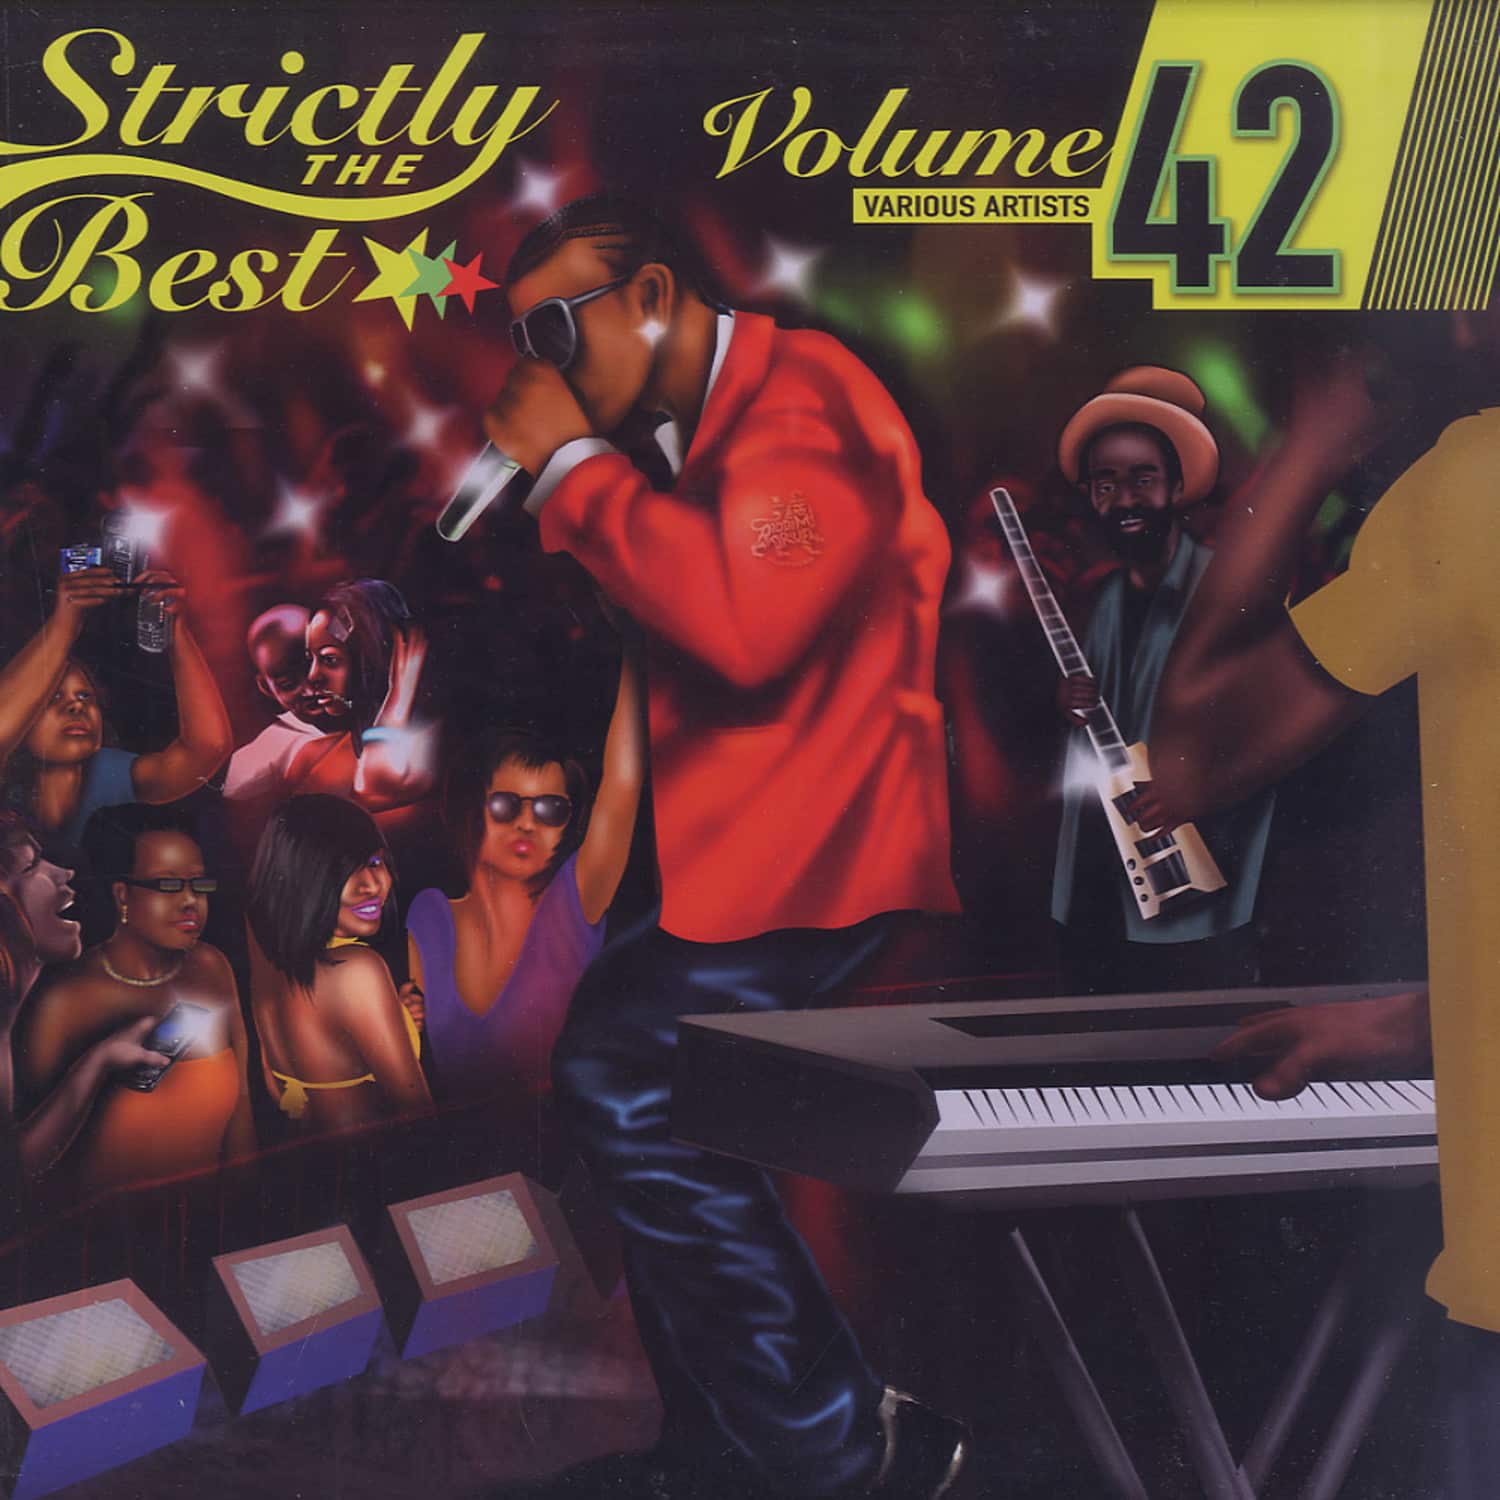 Strictly The Best - VOL.42